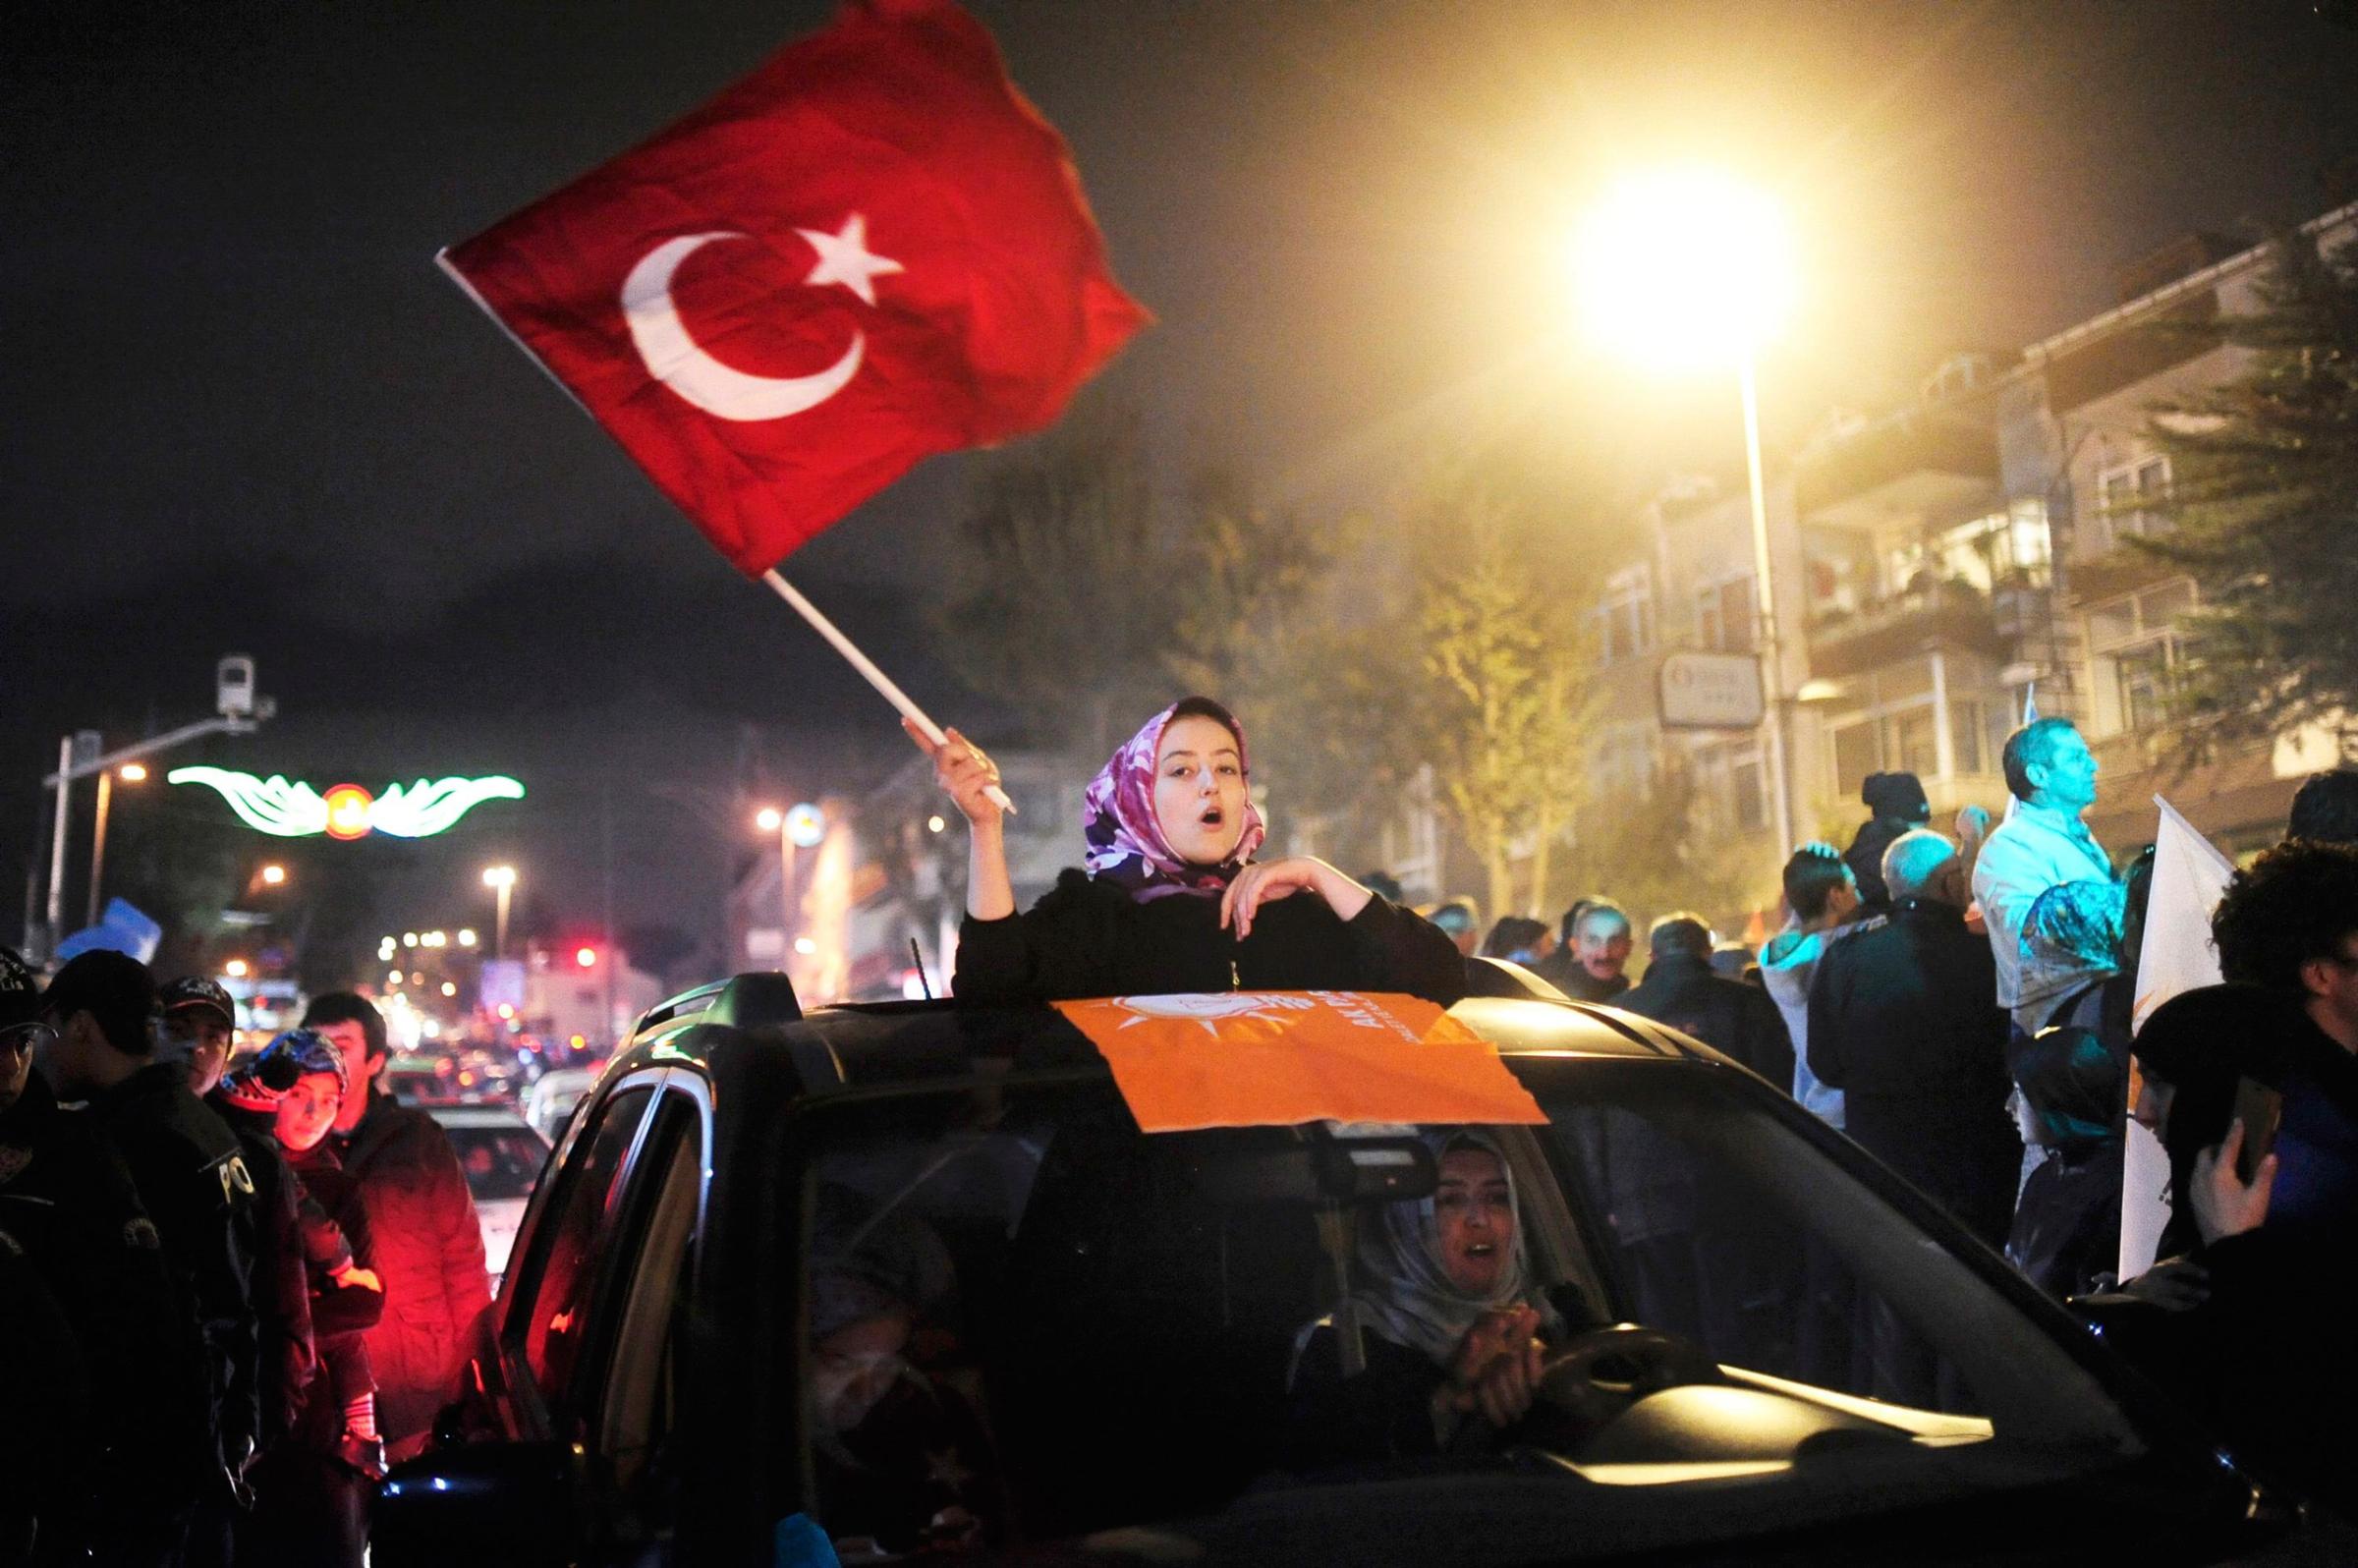 Supporters of AK Party gather near the residence of Turkish President Tayyip Erdogan to celebrate their party's election victory in Istanbul, Turkey